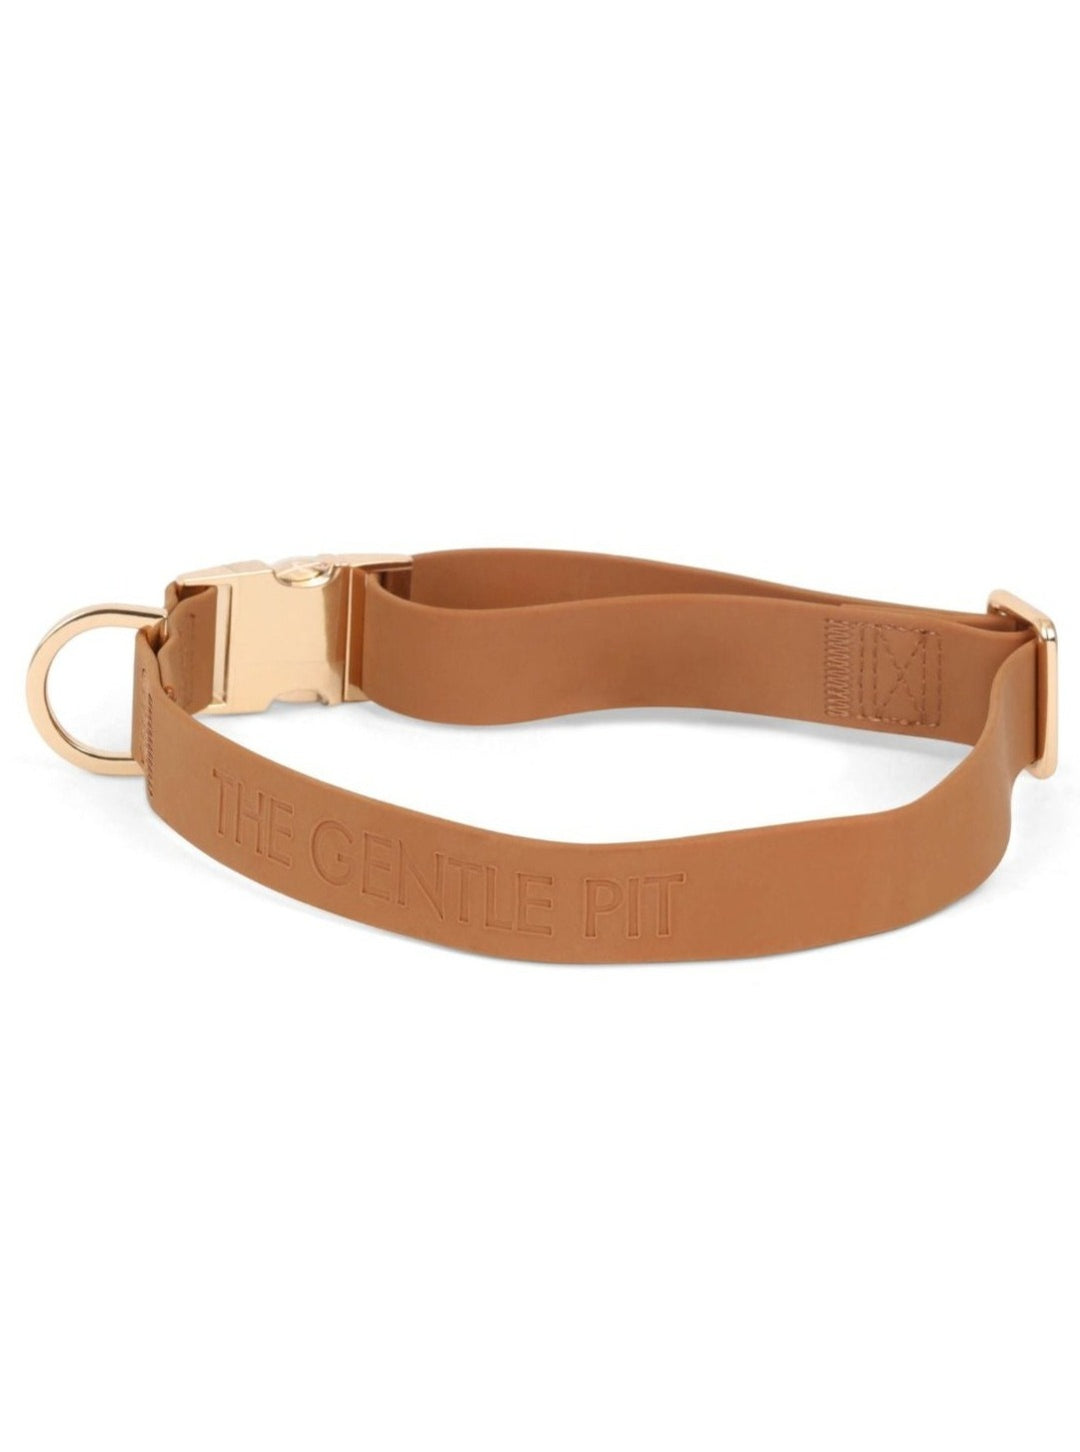 Louis Vuitton Dog Collar Review, Was It Worth It?